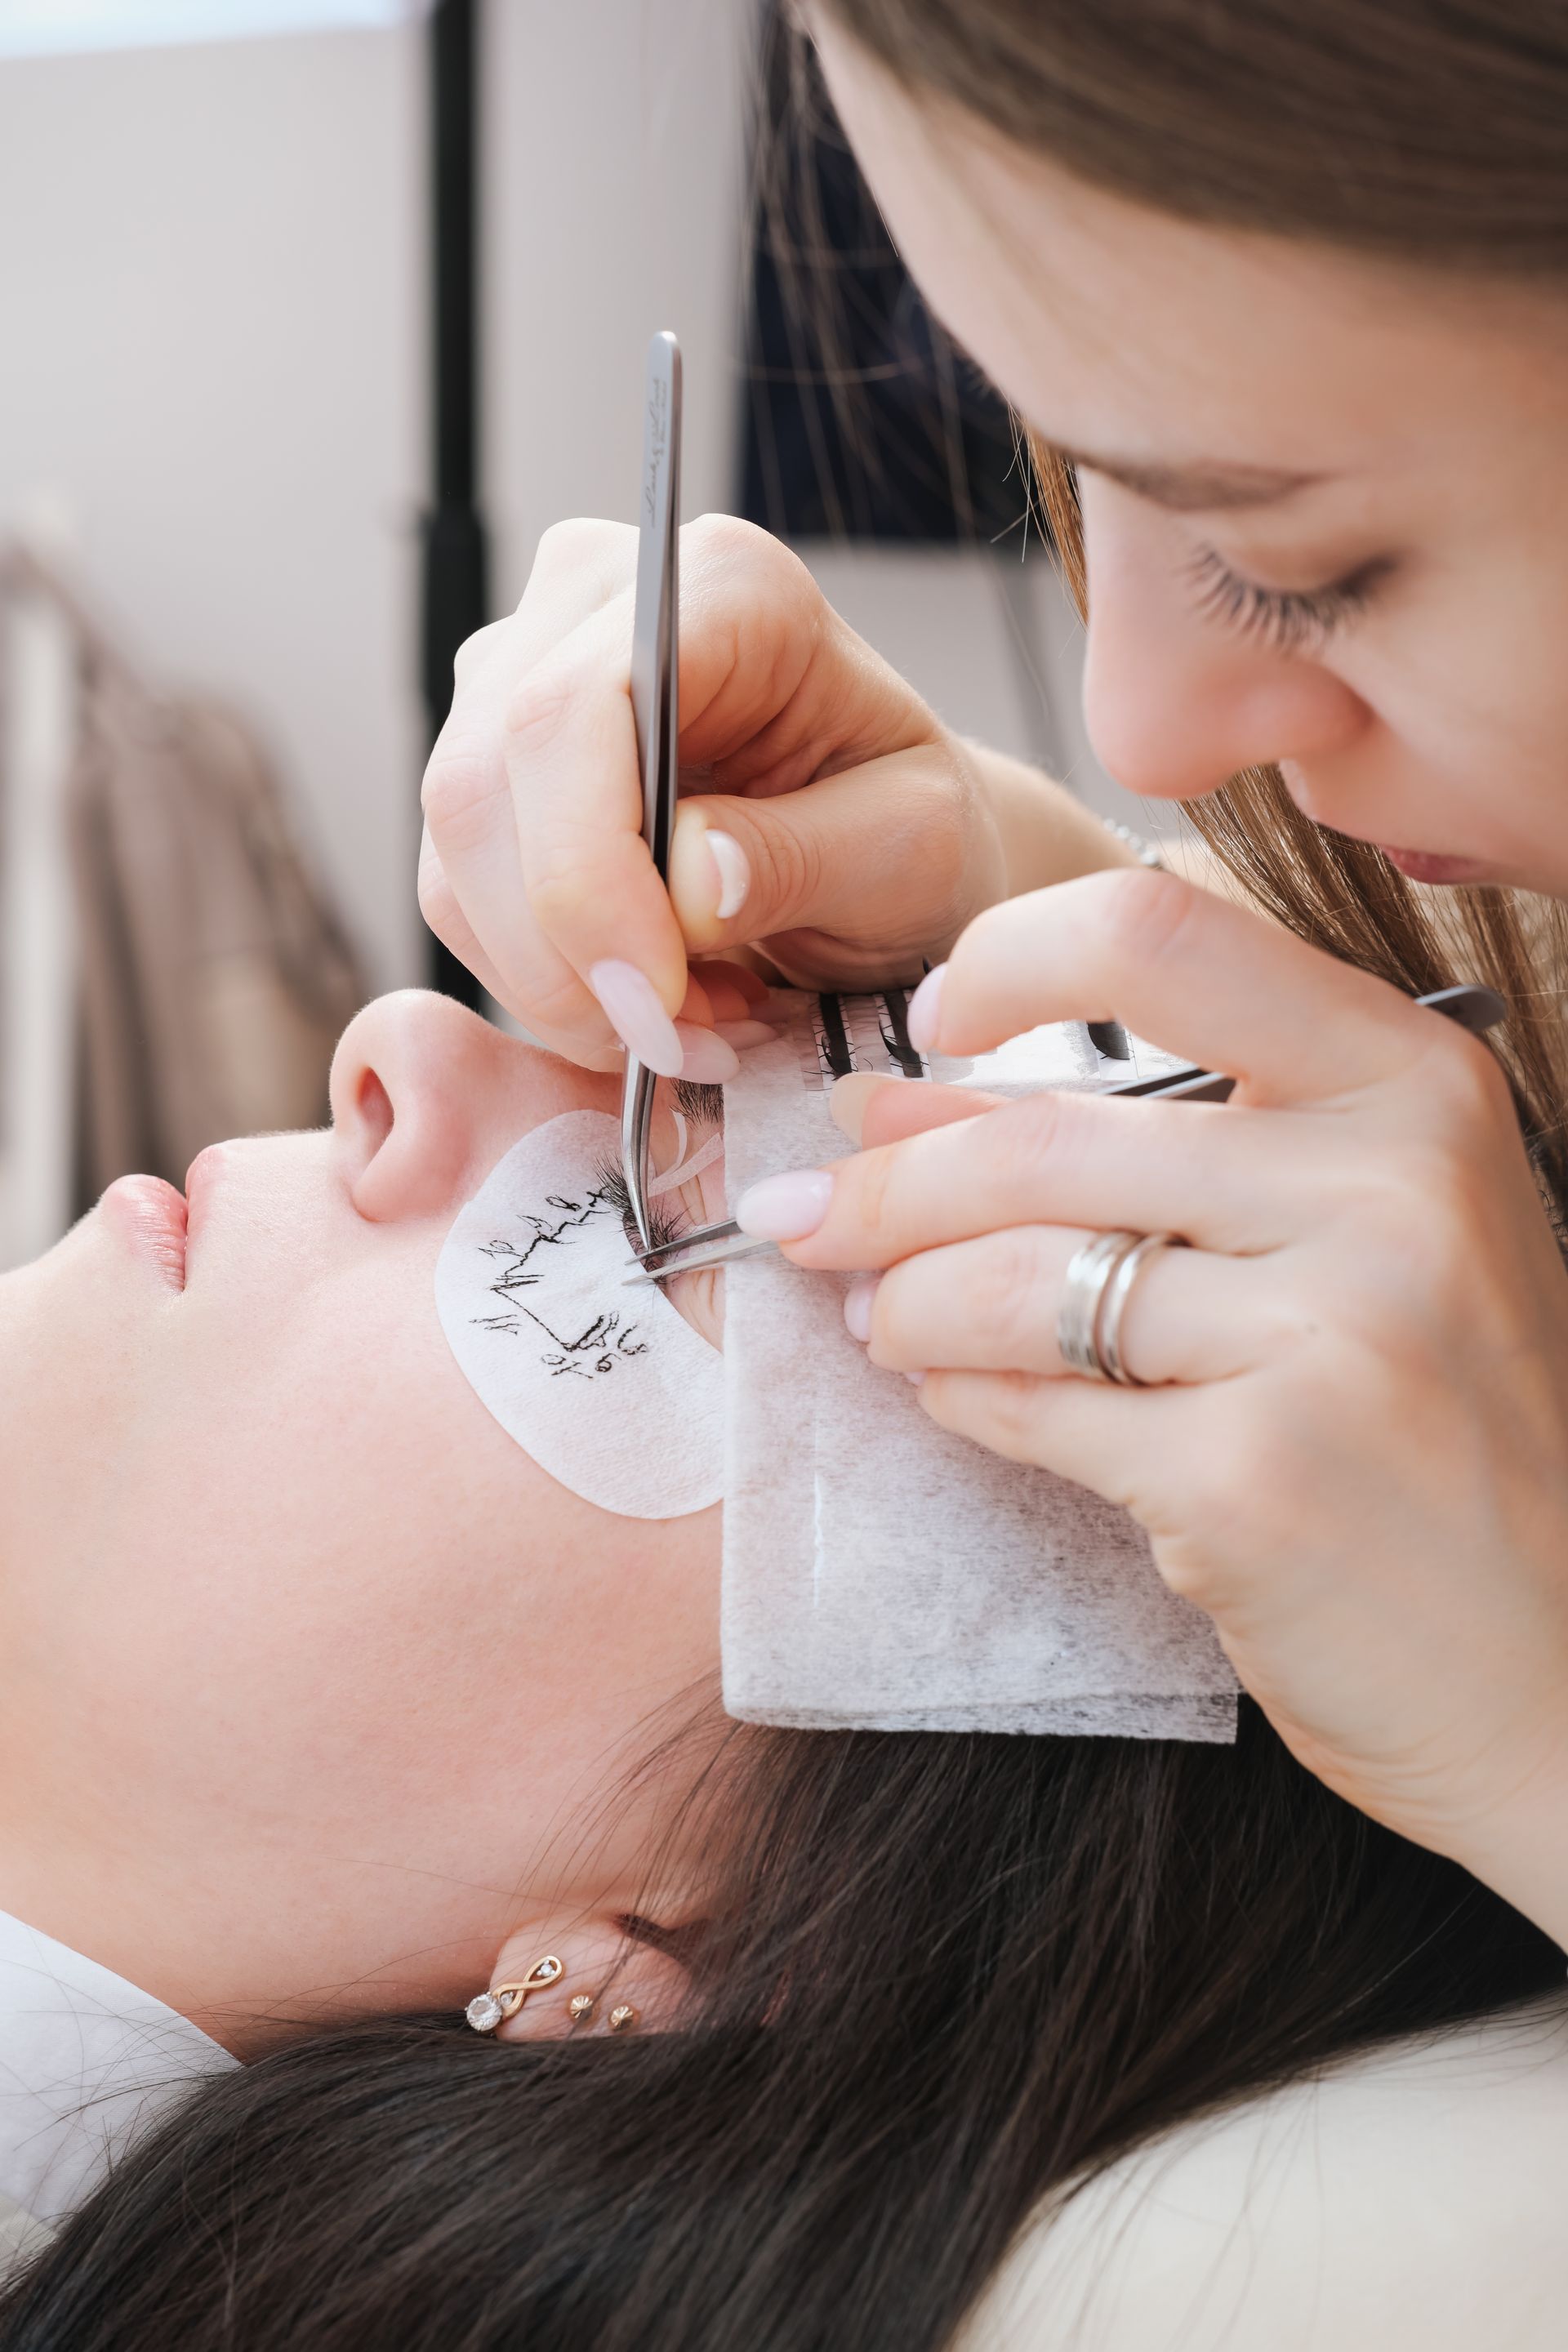 A woman is getting her eyelashes done by a makeup artist.